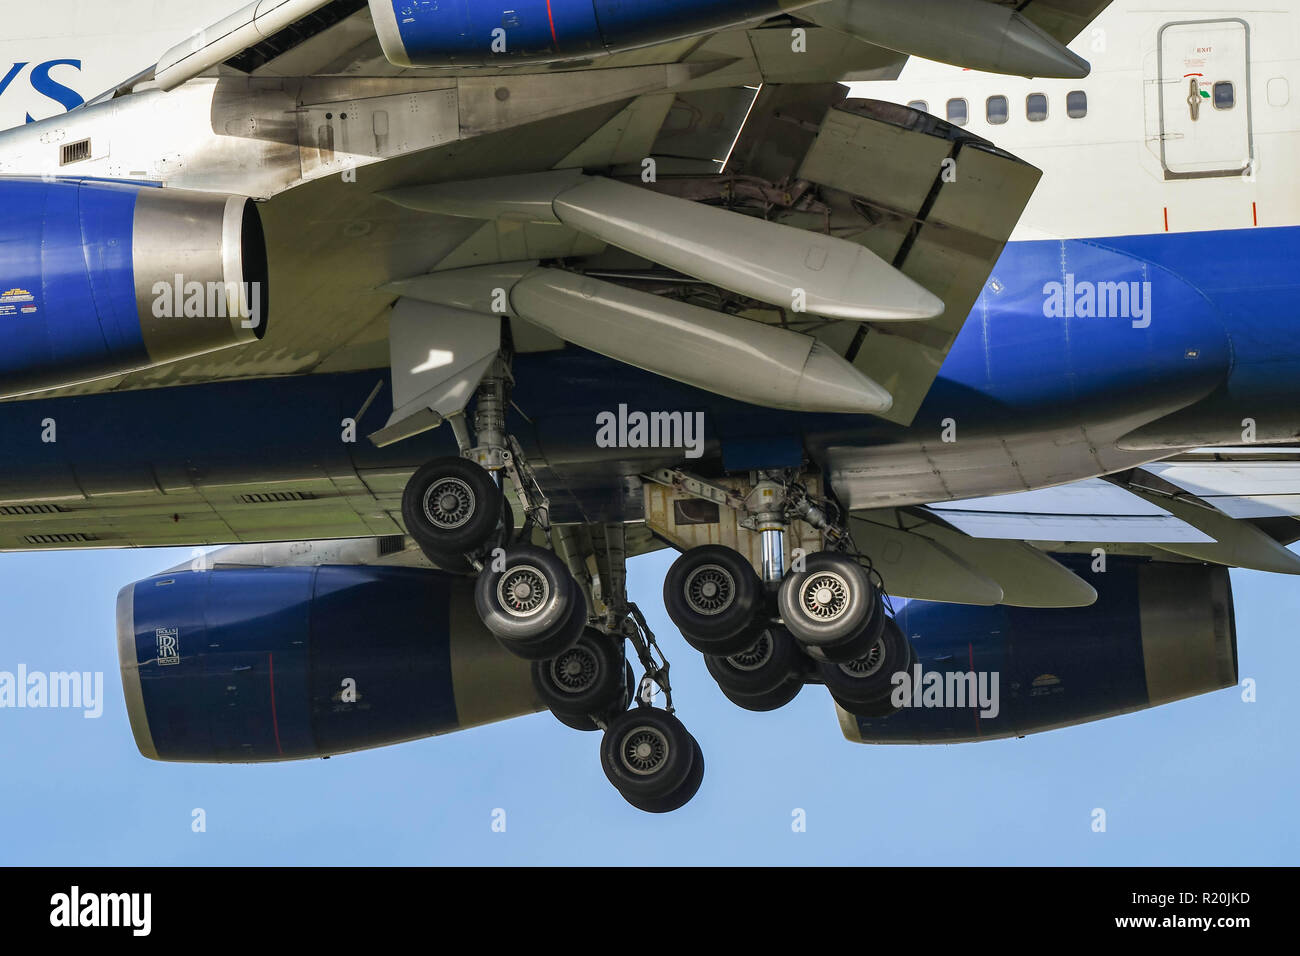 LONDON, ENGLAND - NOVEMBER 2018: Close up view of the wheels down and flaps down on a Boeing 747 'Jumbo jet' as it comes in to land at London Heathrow Stock Photo